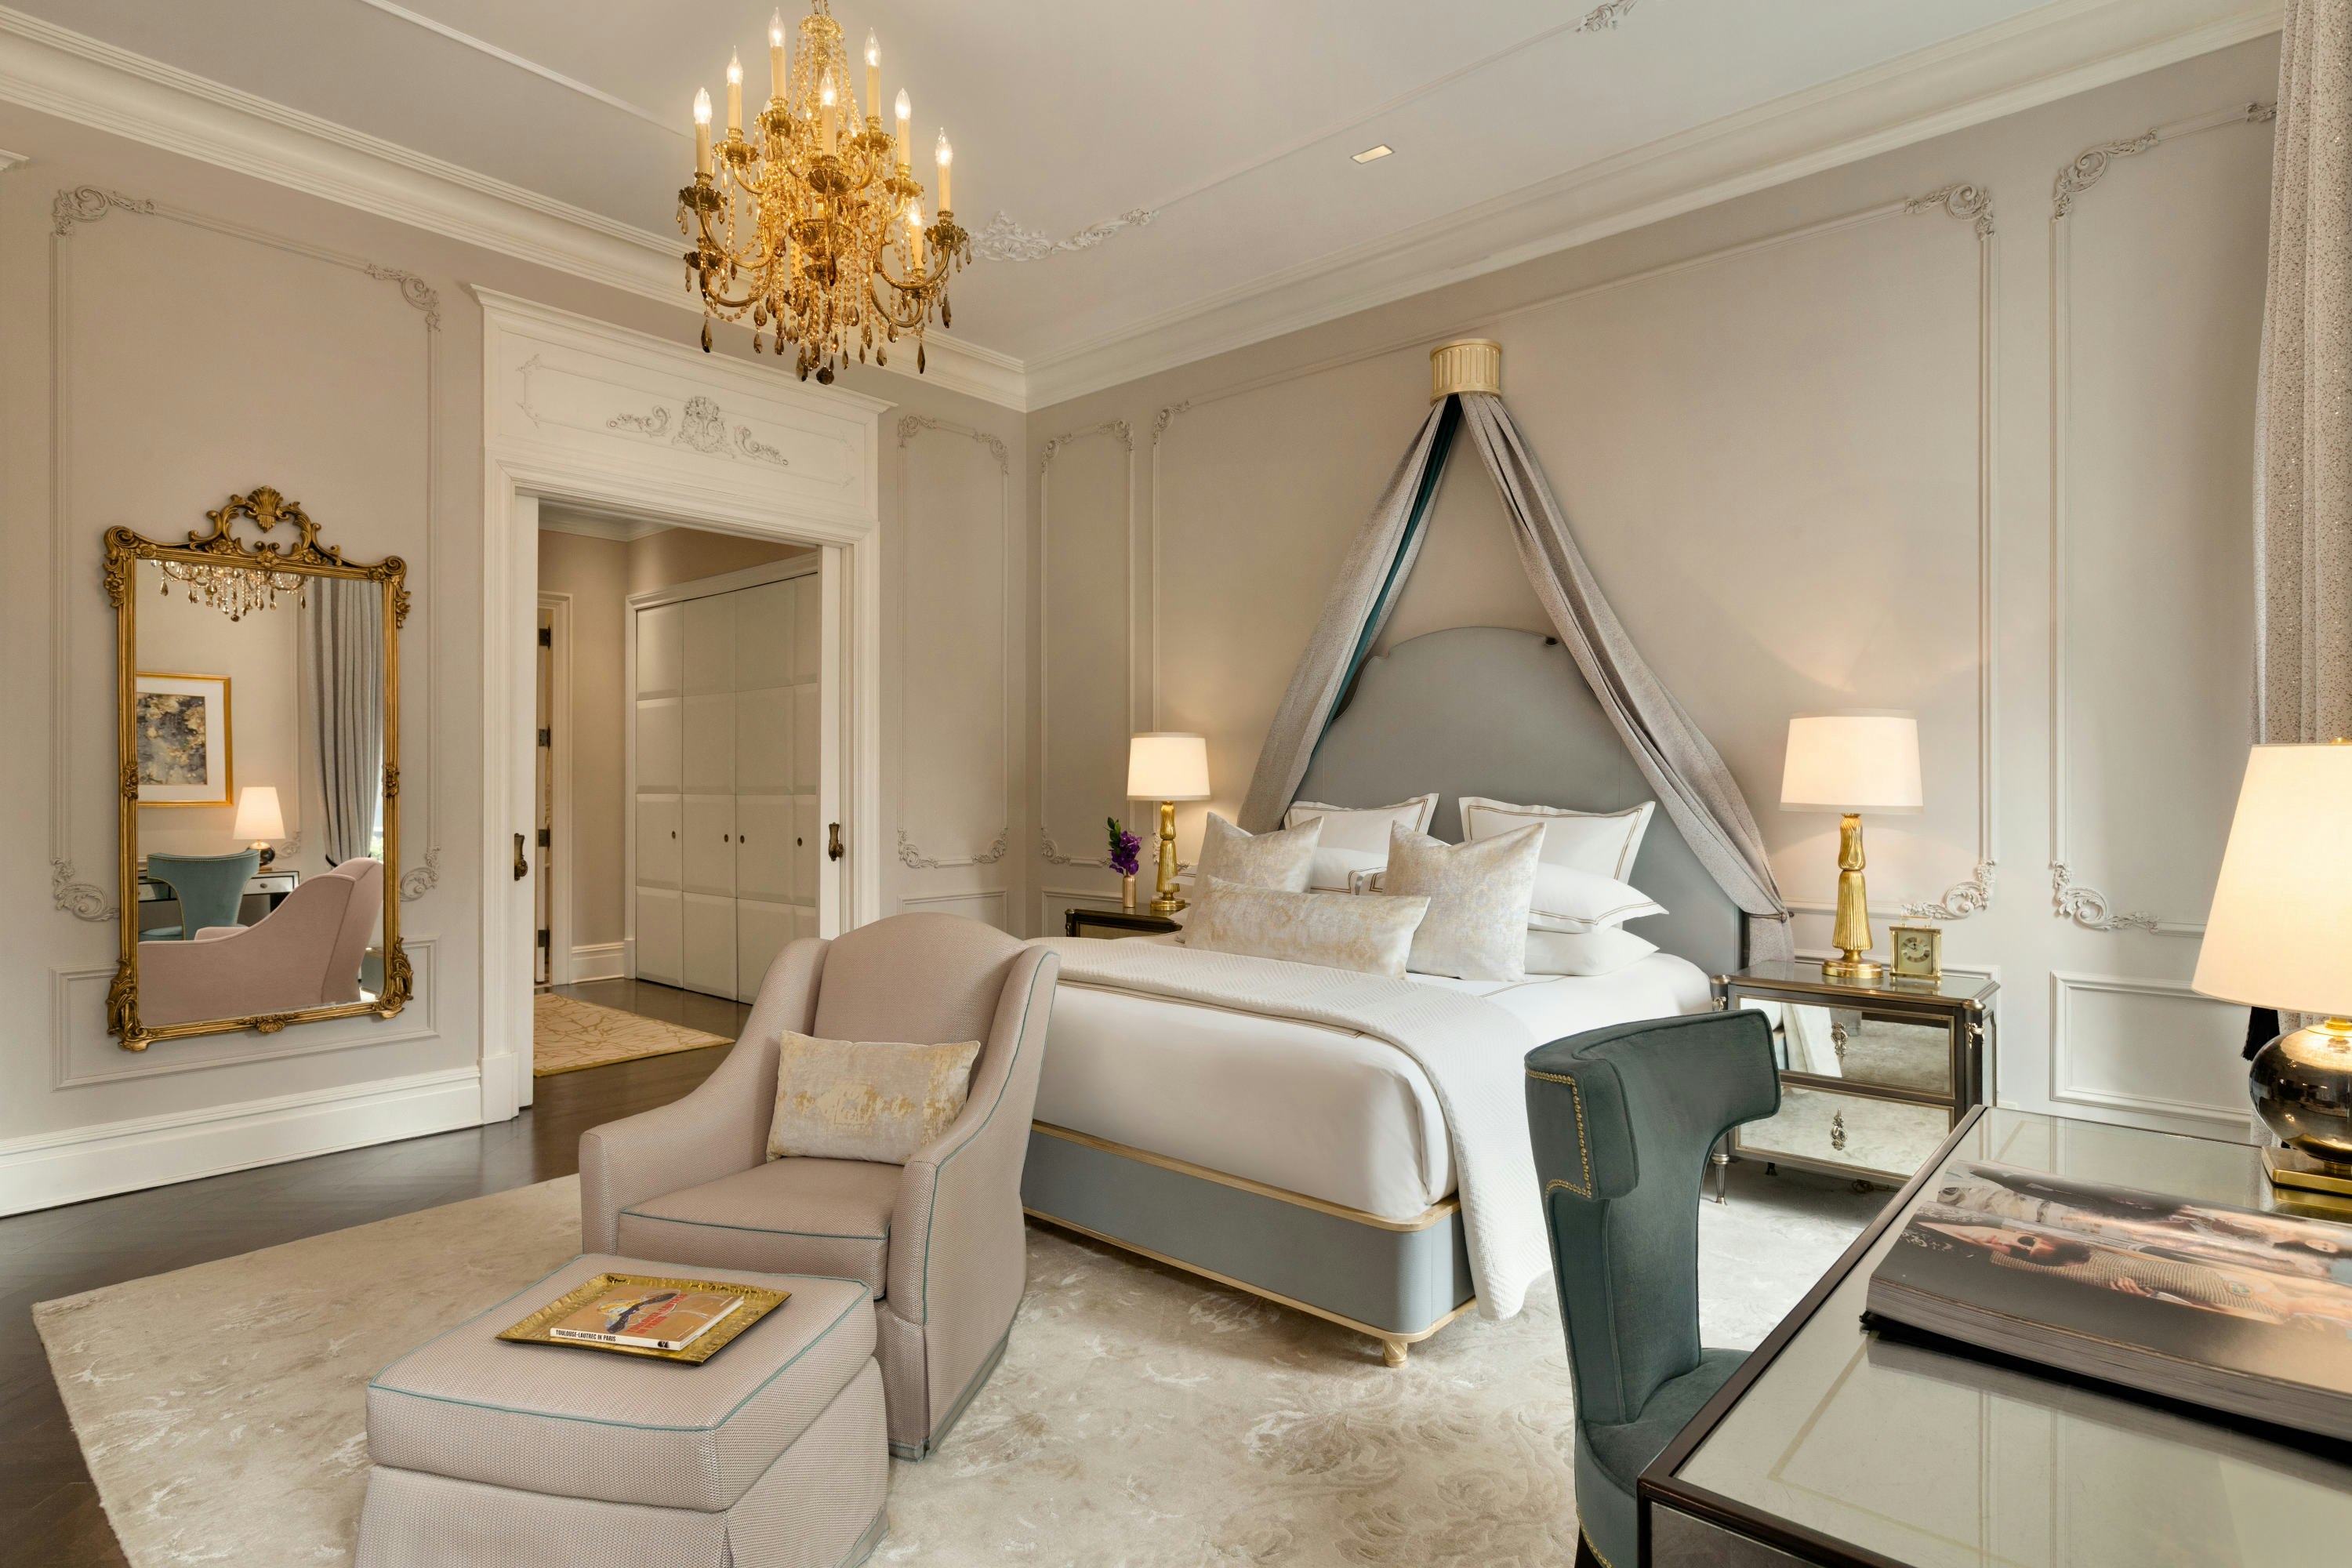 Travel News - The Plaza, A Fairmont Managed Hotel - Plaza Royal Suite - 1260625